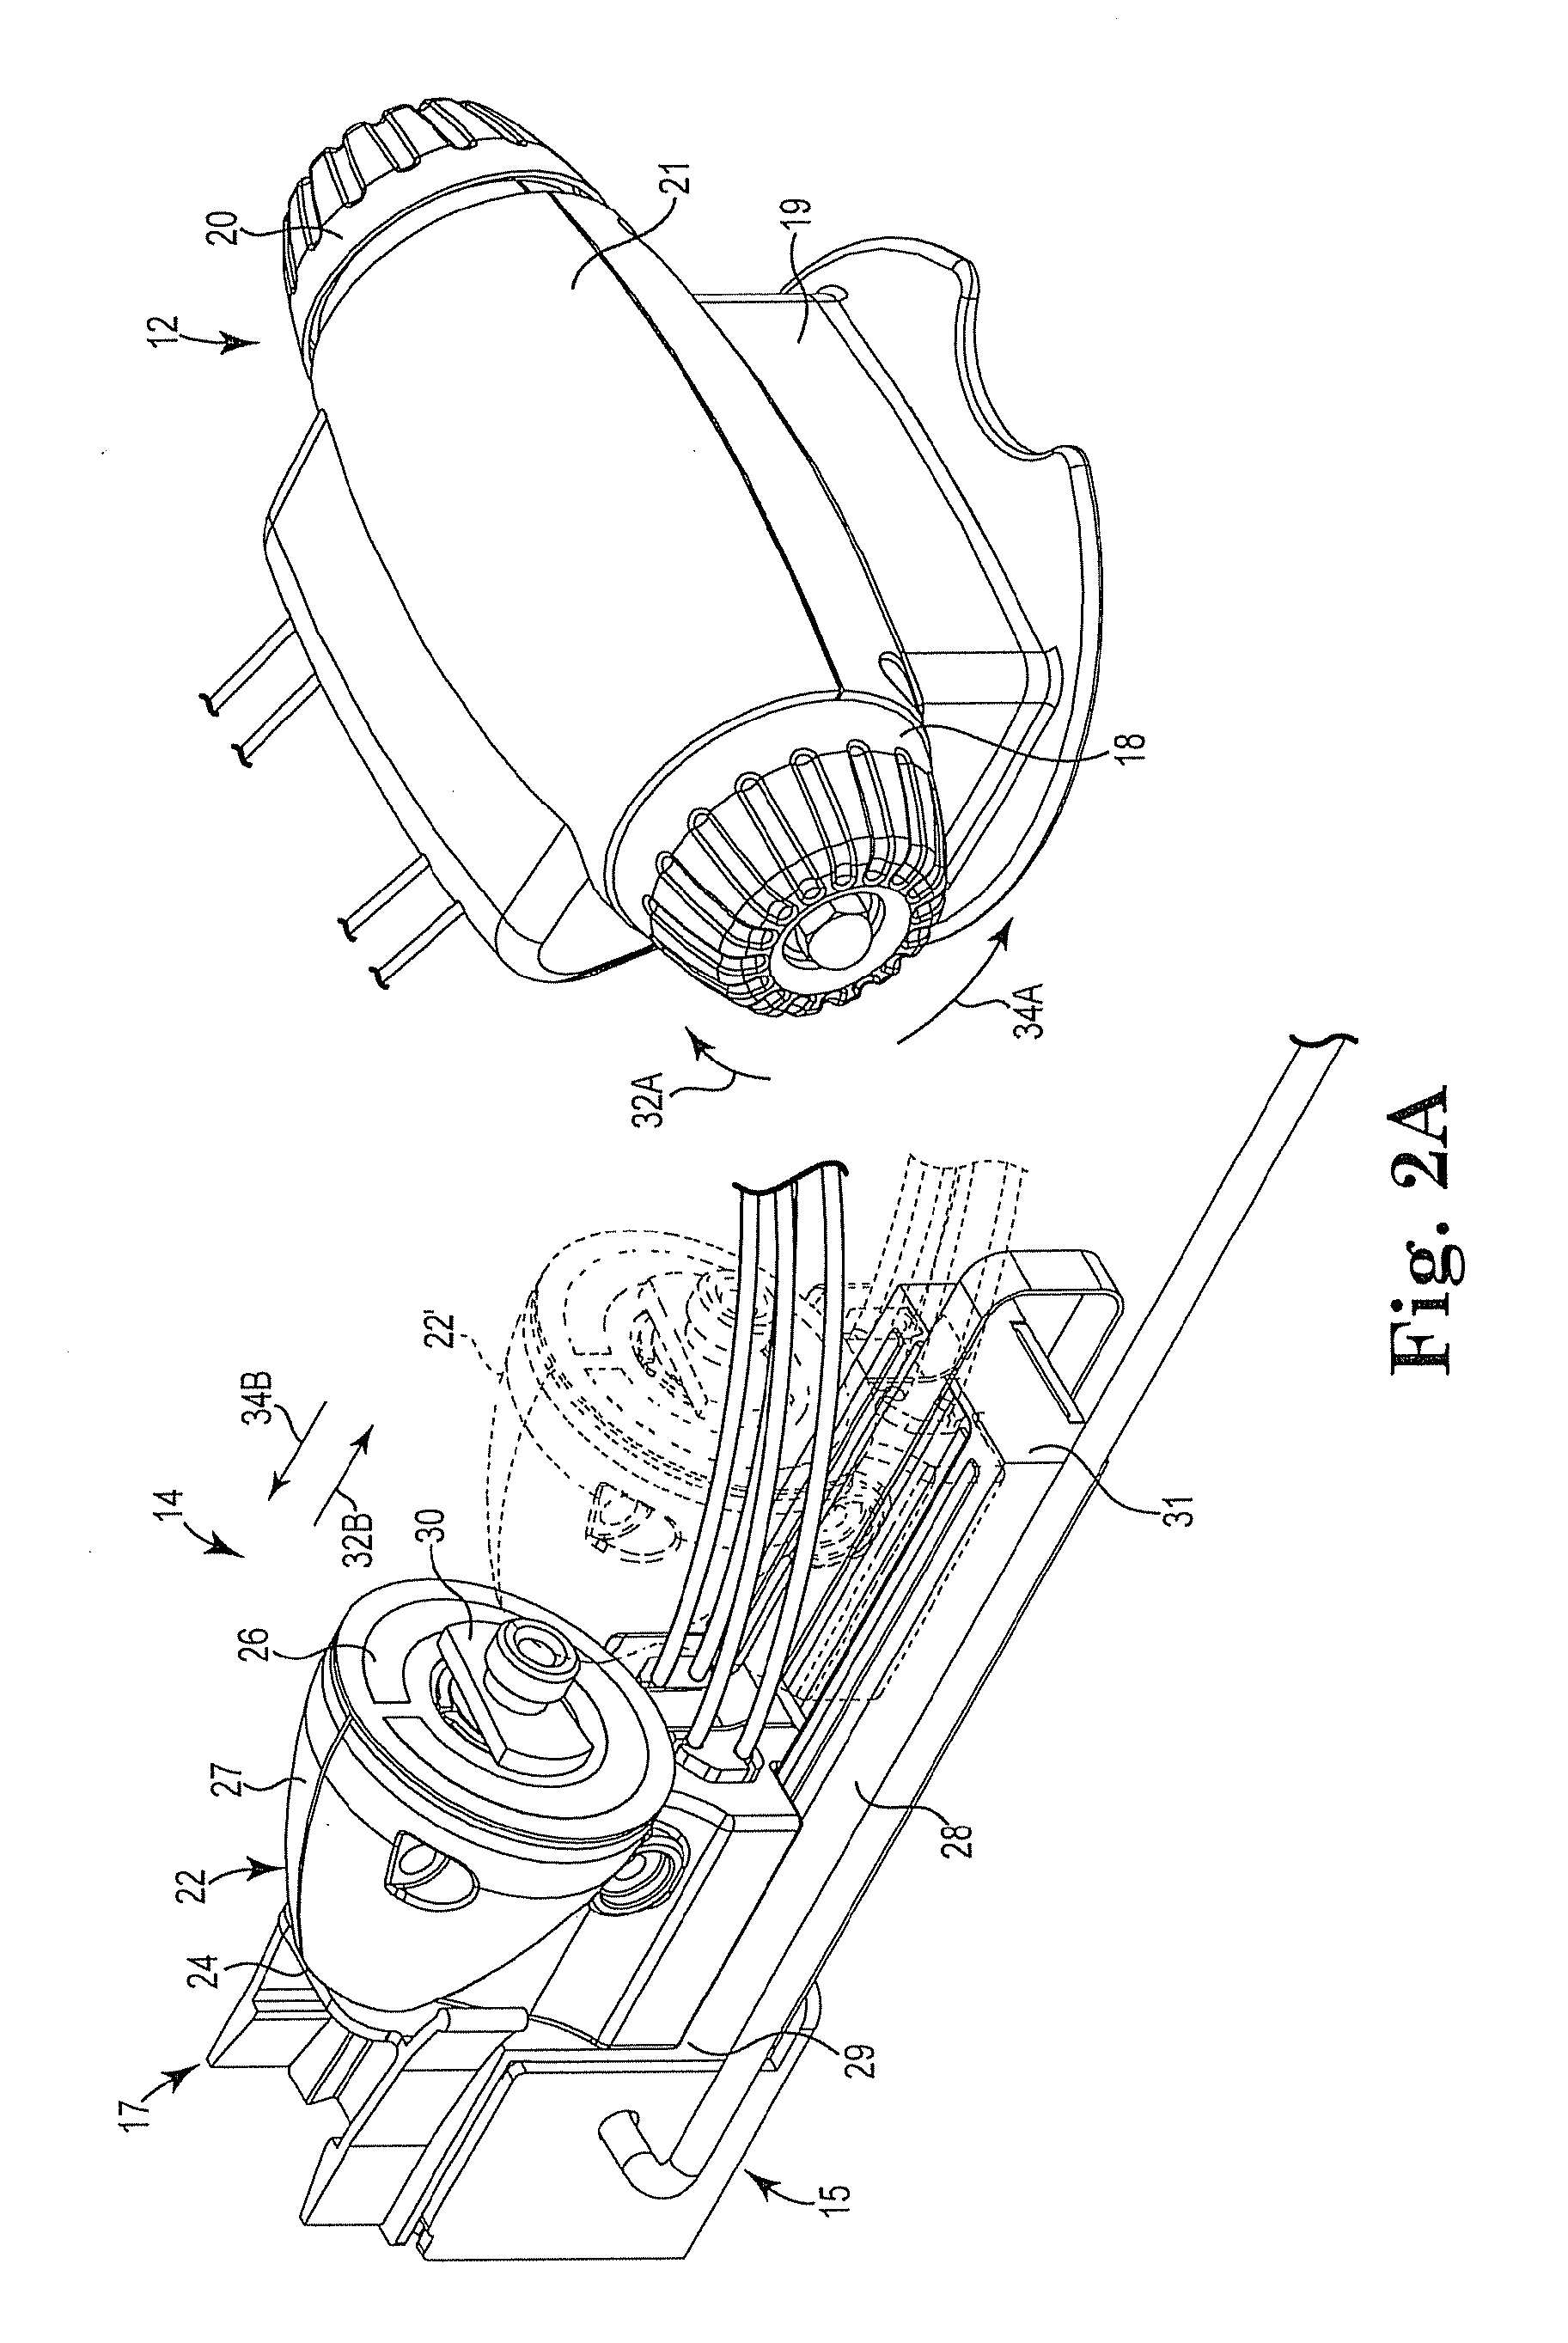 Stereotactic drive system